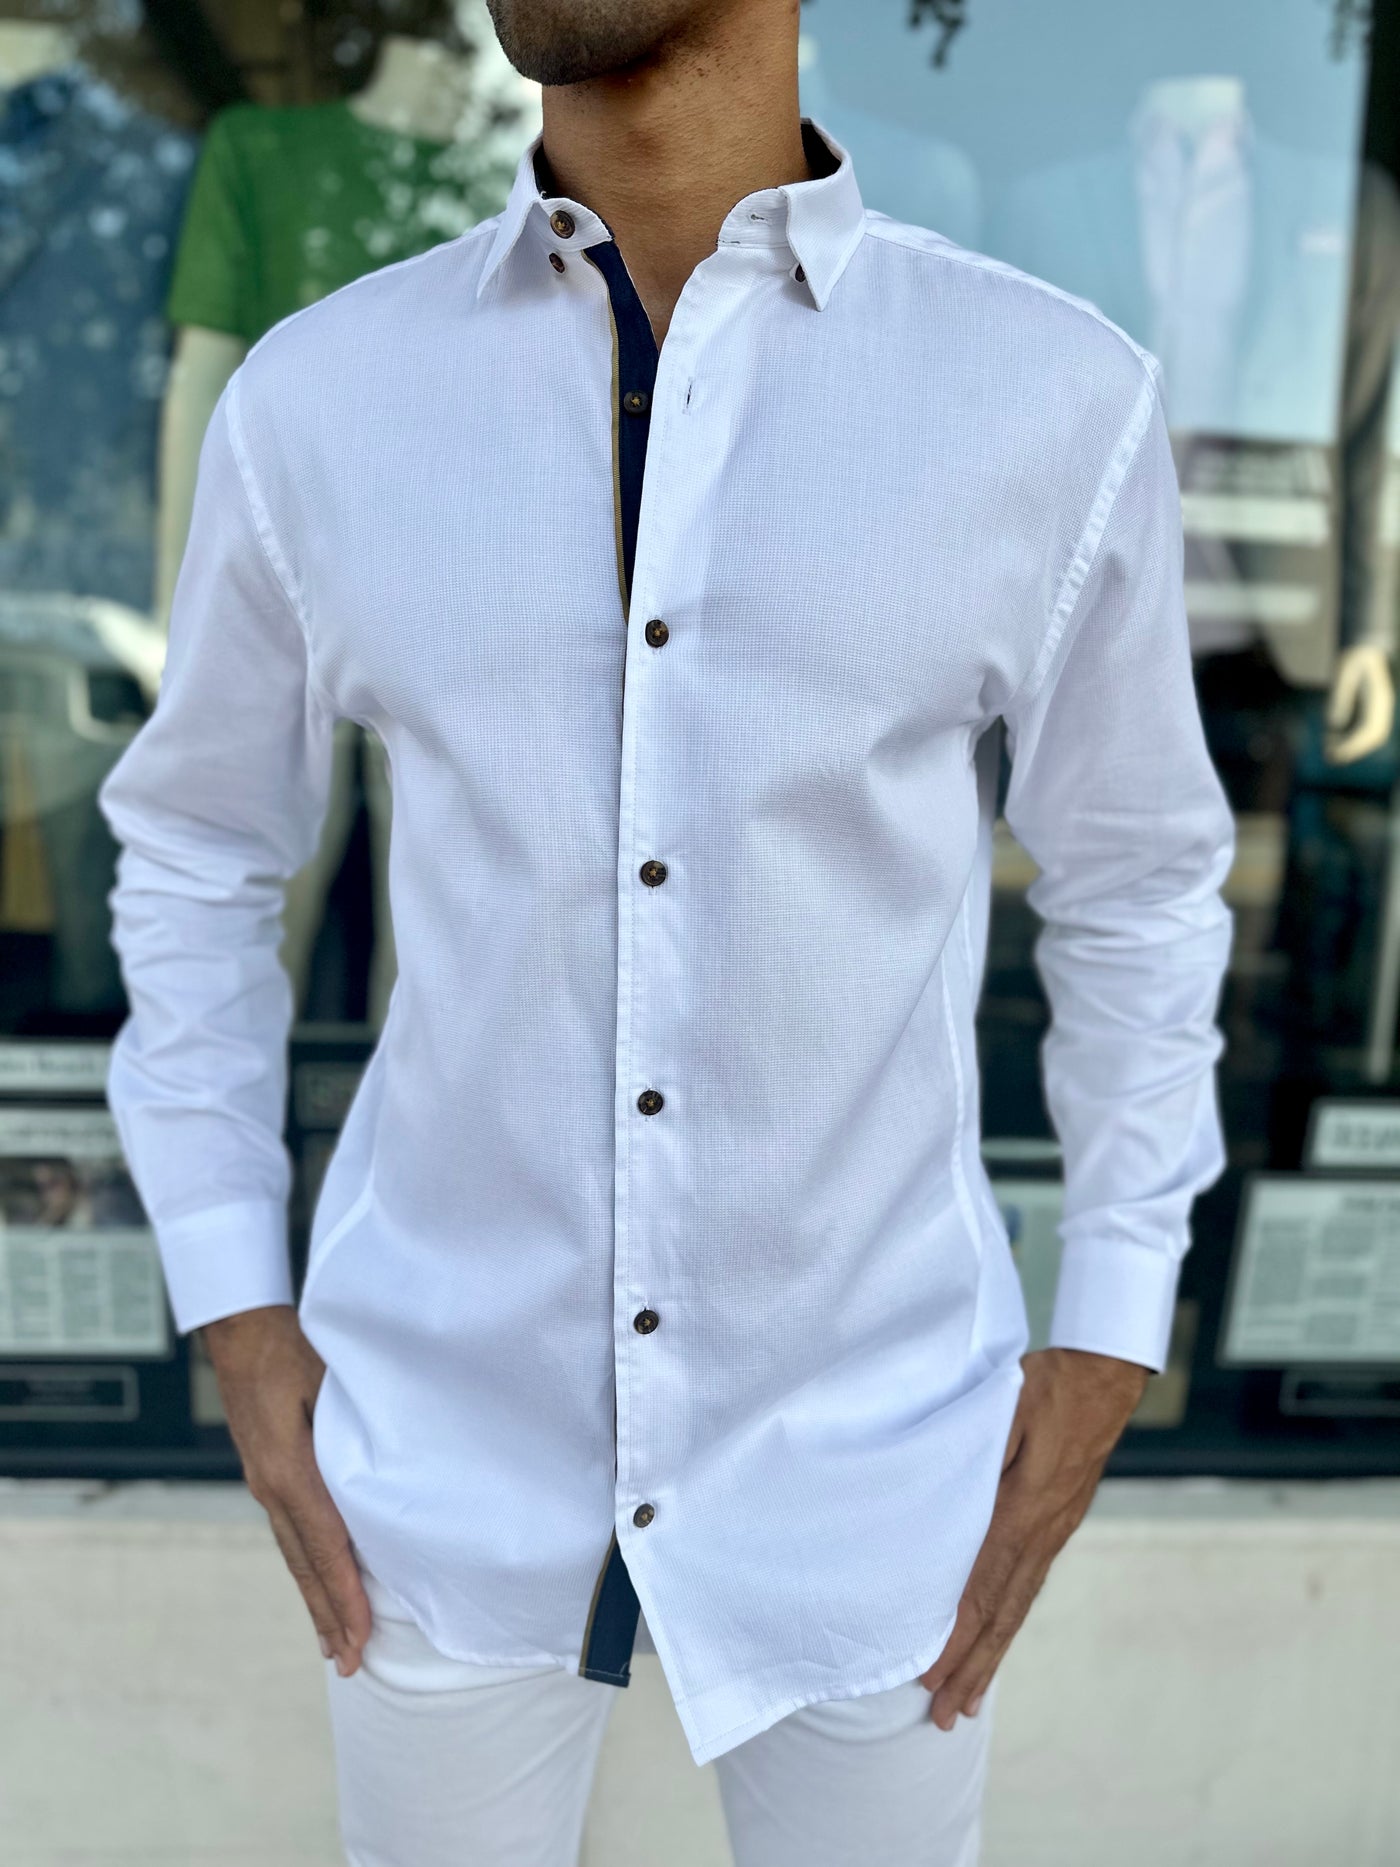 Will Long Sleeve Button Down